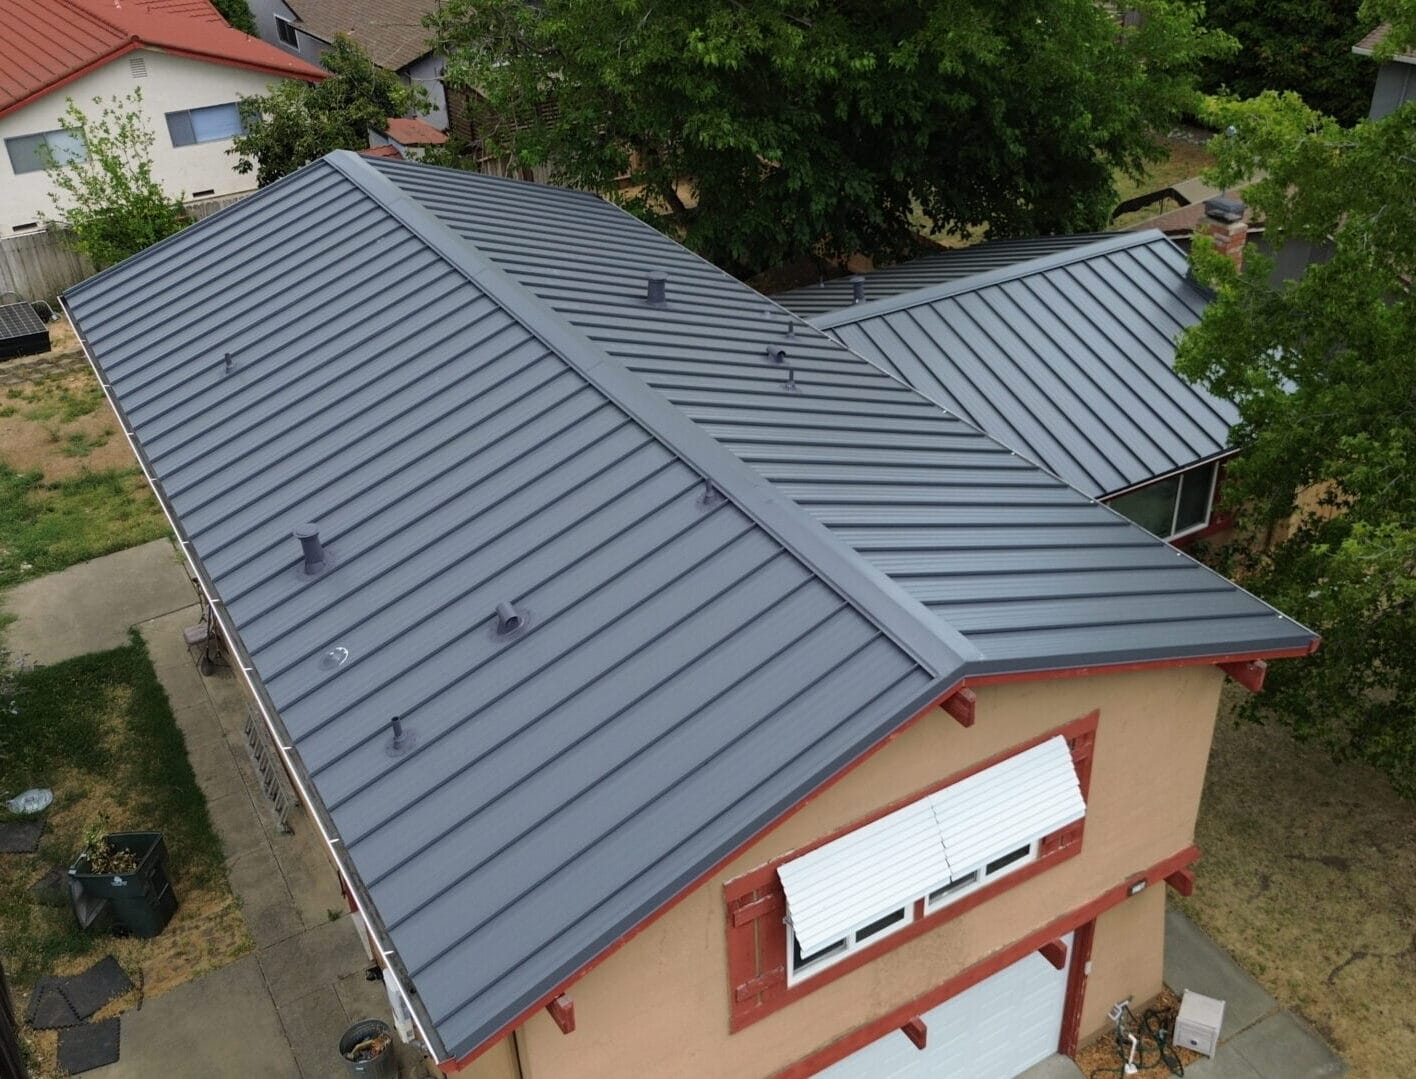 metal panel metal paneling standing seem metal roof replacement new roof re-roof roofing contractor roofing company roofer reroof local roofer Fairfield Suisun Benicia Vallejo Rio Vista Concord Dixon Davis Woodland